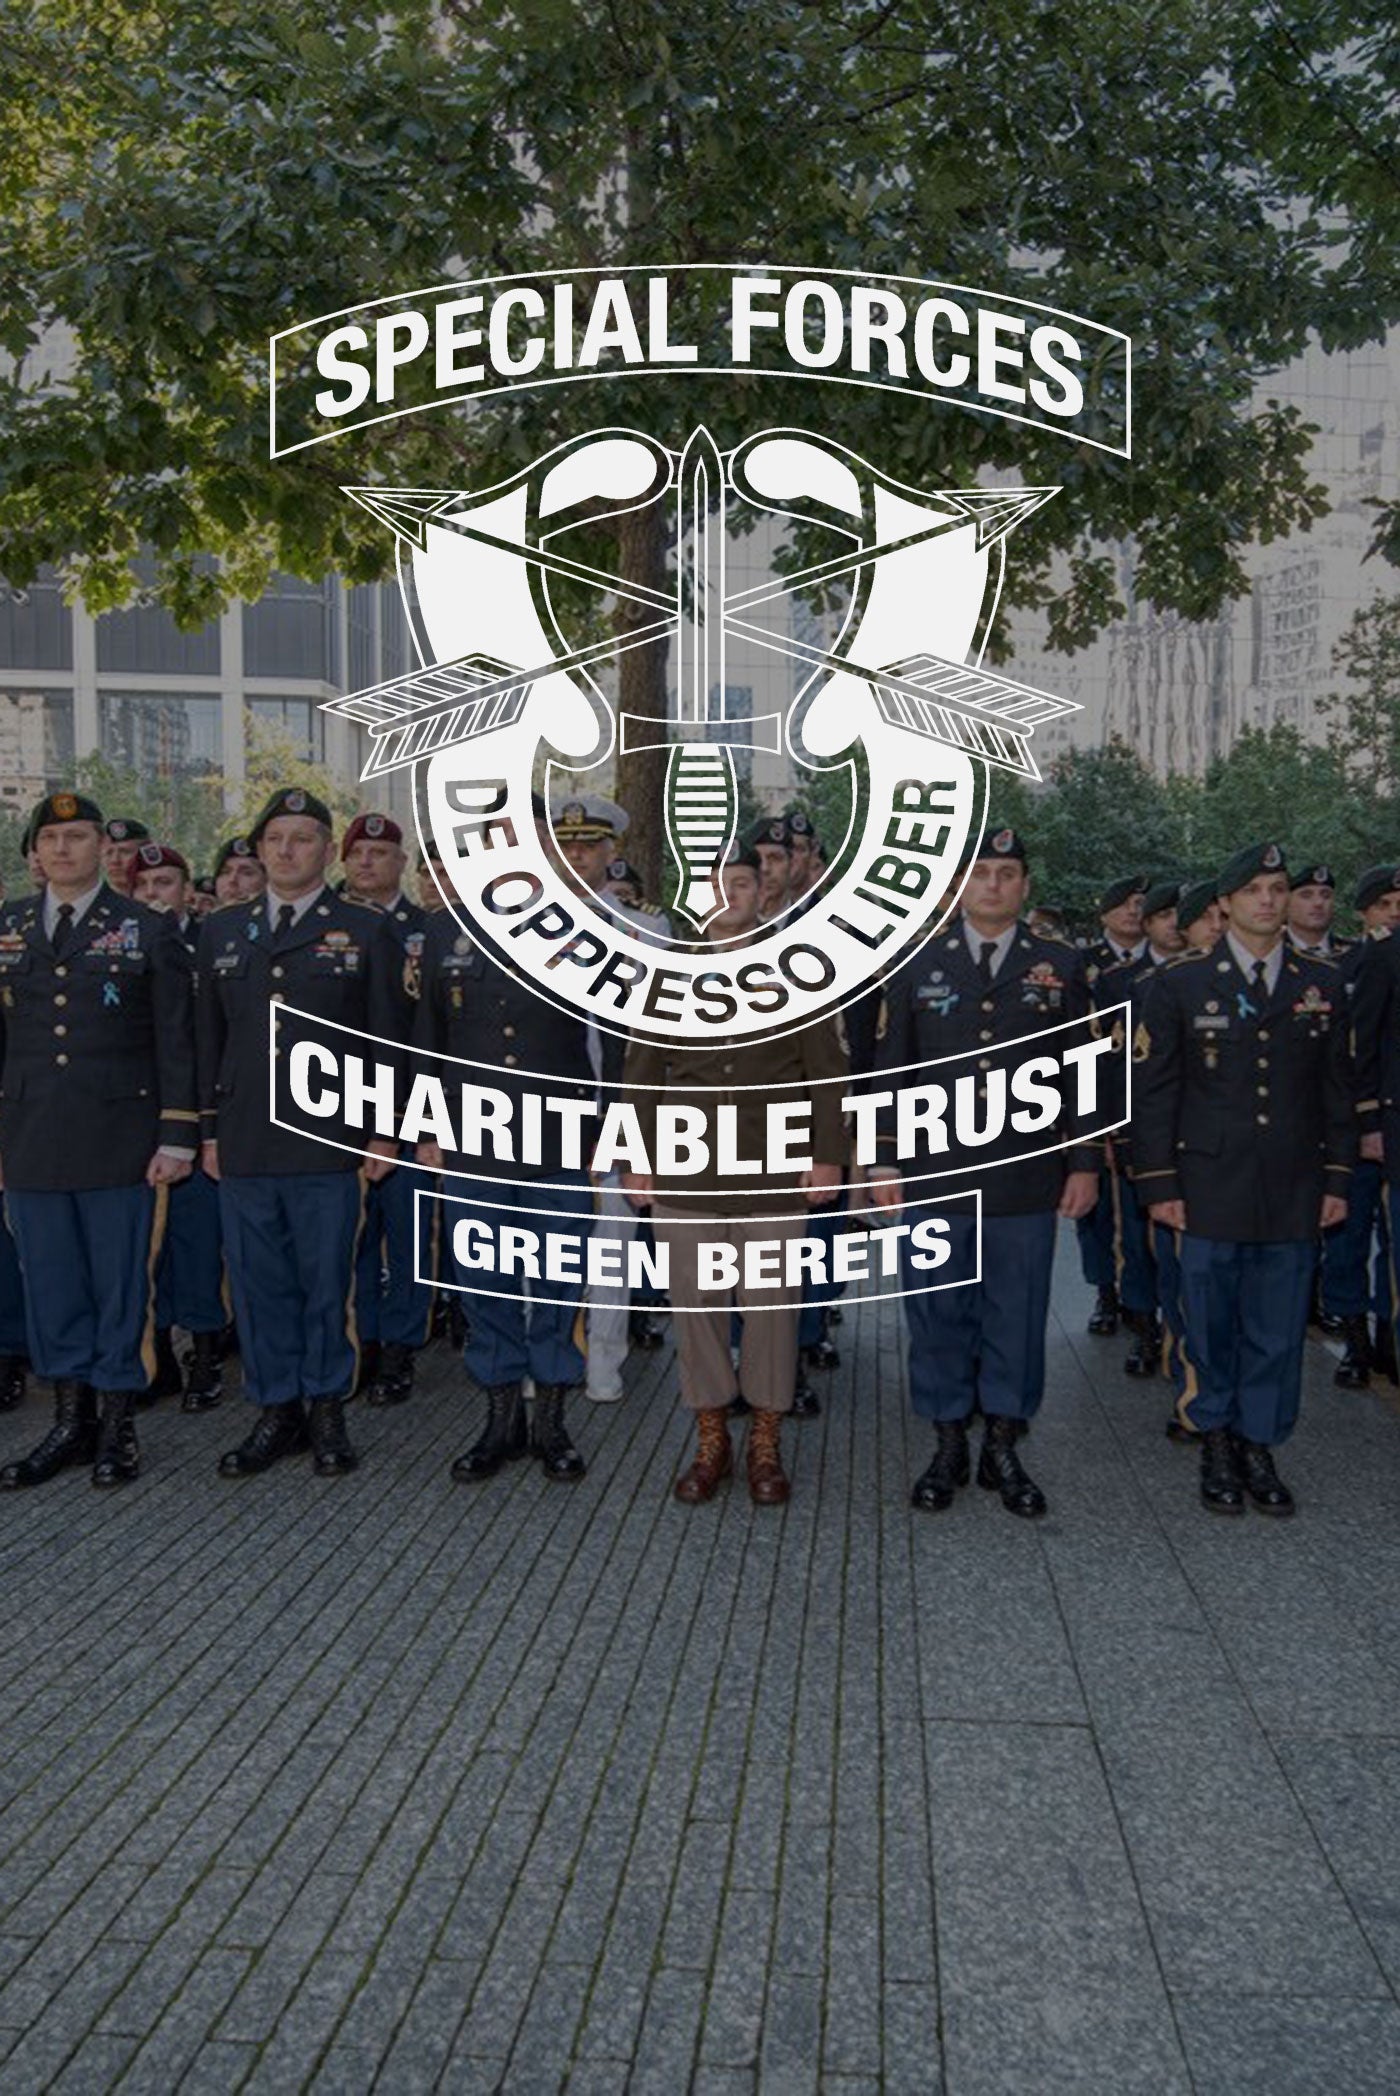 Members of the Special Forces Charitable Trust: Green Berets stand in an organized formation with their hands at their sides. The Special Forces Charitable Trust logo overlays on top of the image.